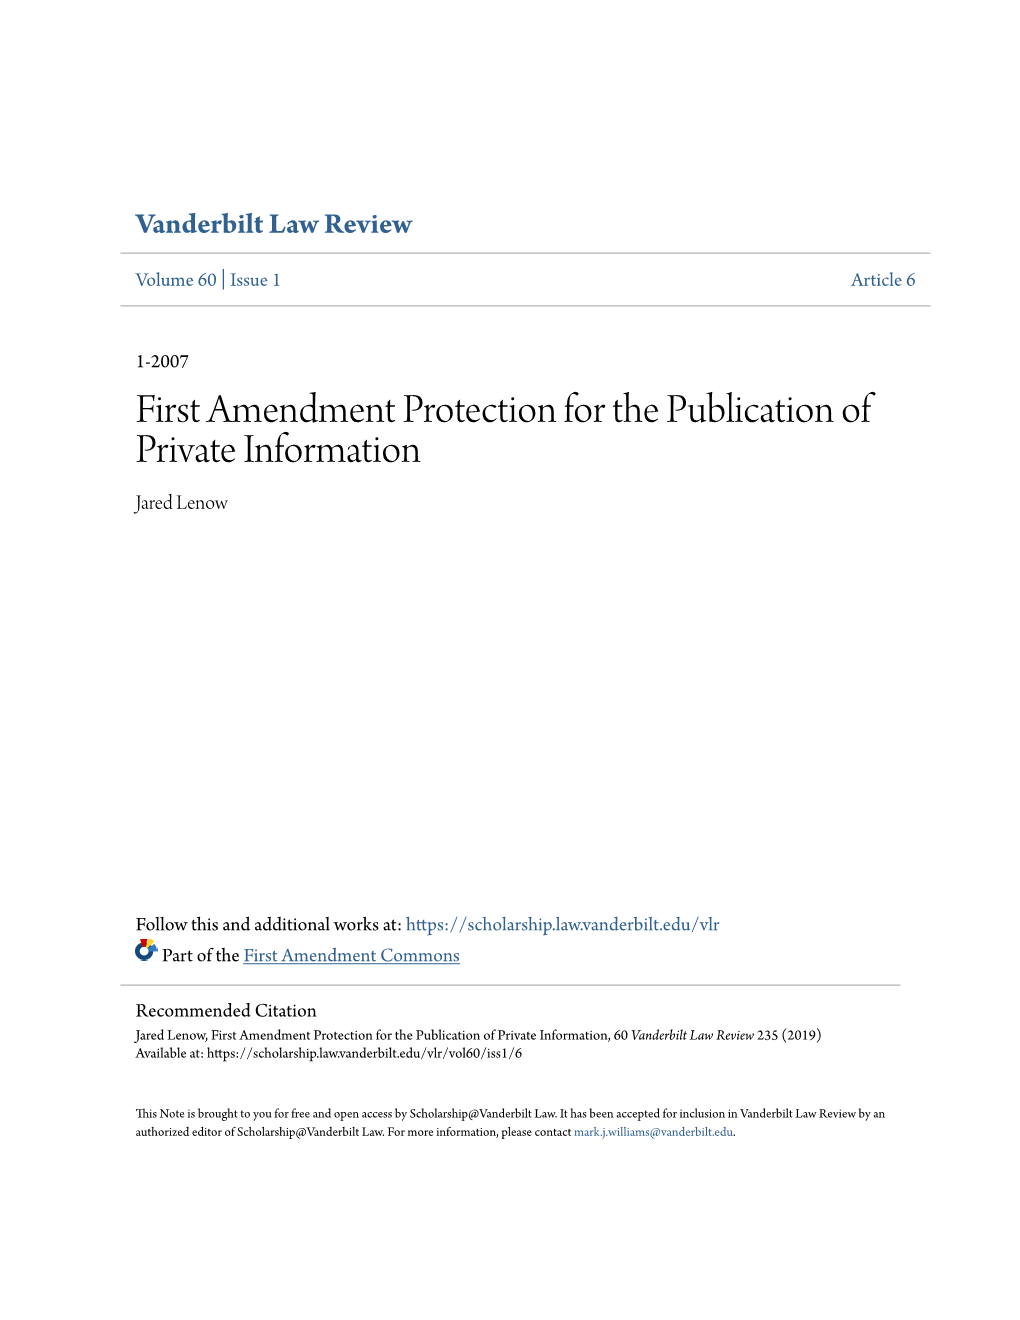 First Amendment Protection for the Publication of Private Information Jared Lenow